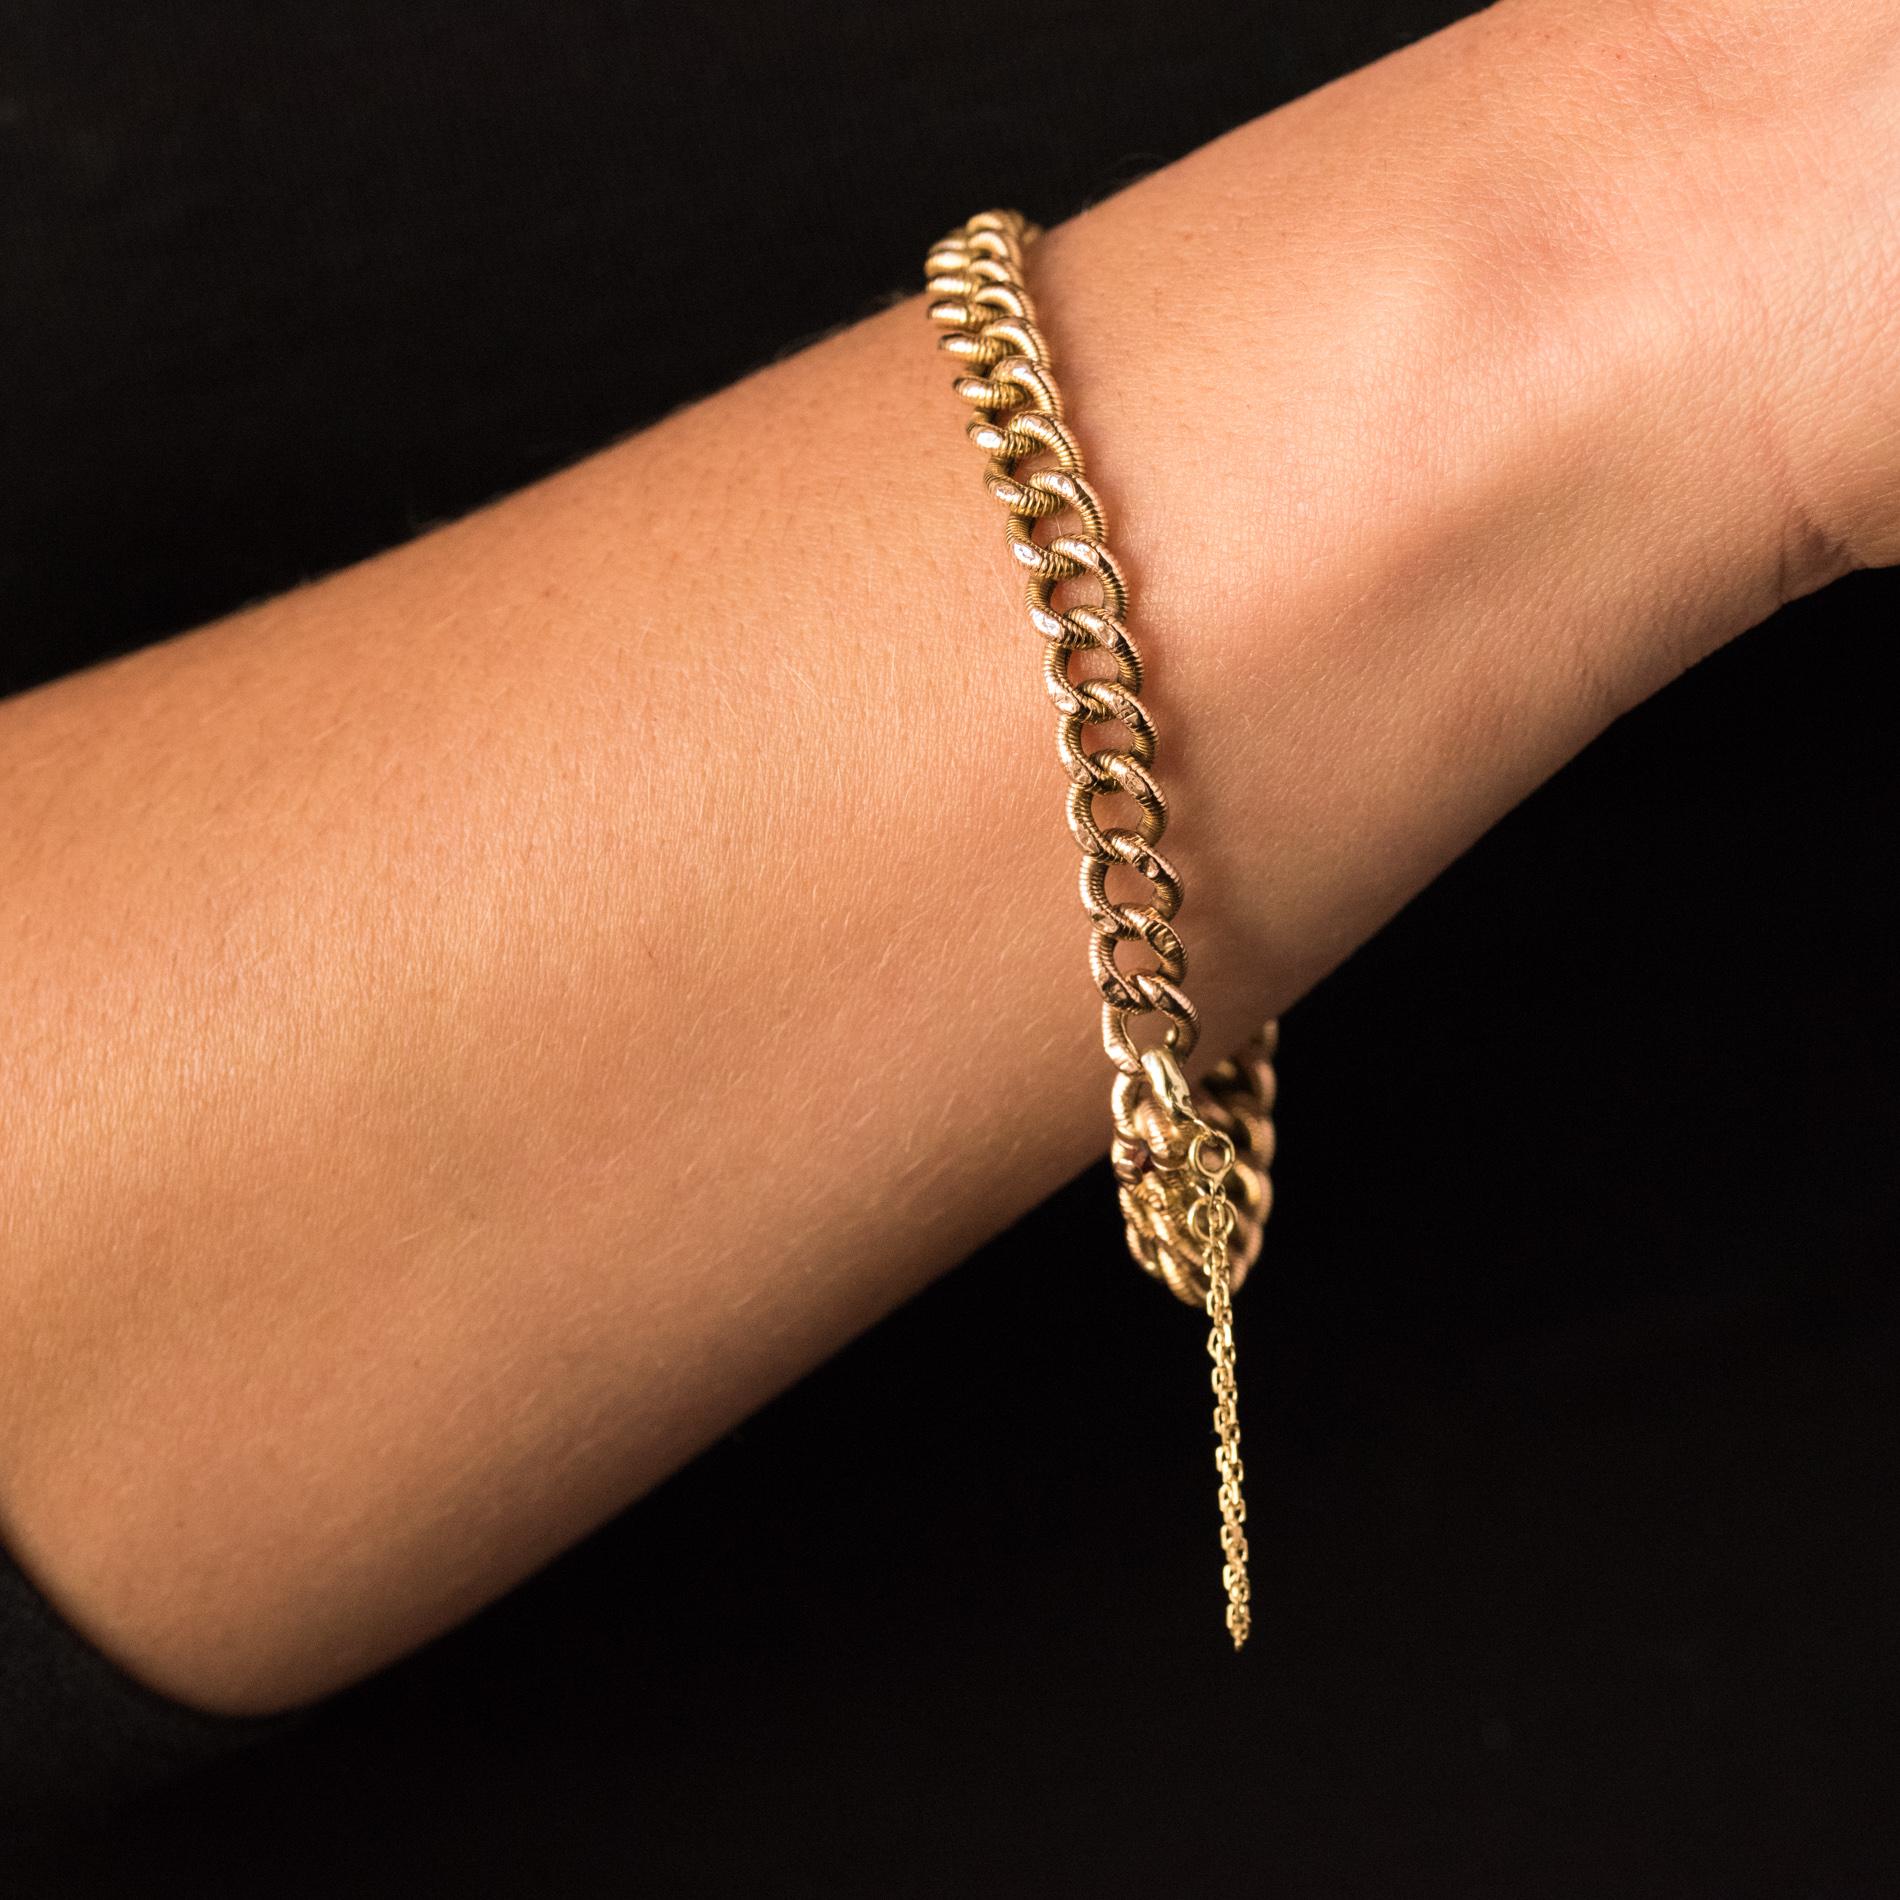 Bracelet in 18 karats rose gold, eagle's head hallmark.
Lovely antique bracelet, it consists of a chiseled curb mesh. Very flexible, the clasp of this antique bracelet is a ratchet with safety chain.
Length: 18.5 cm, width: 7 mm, thickness: about 3